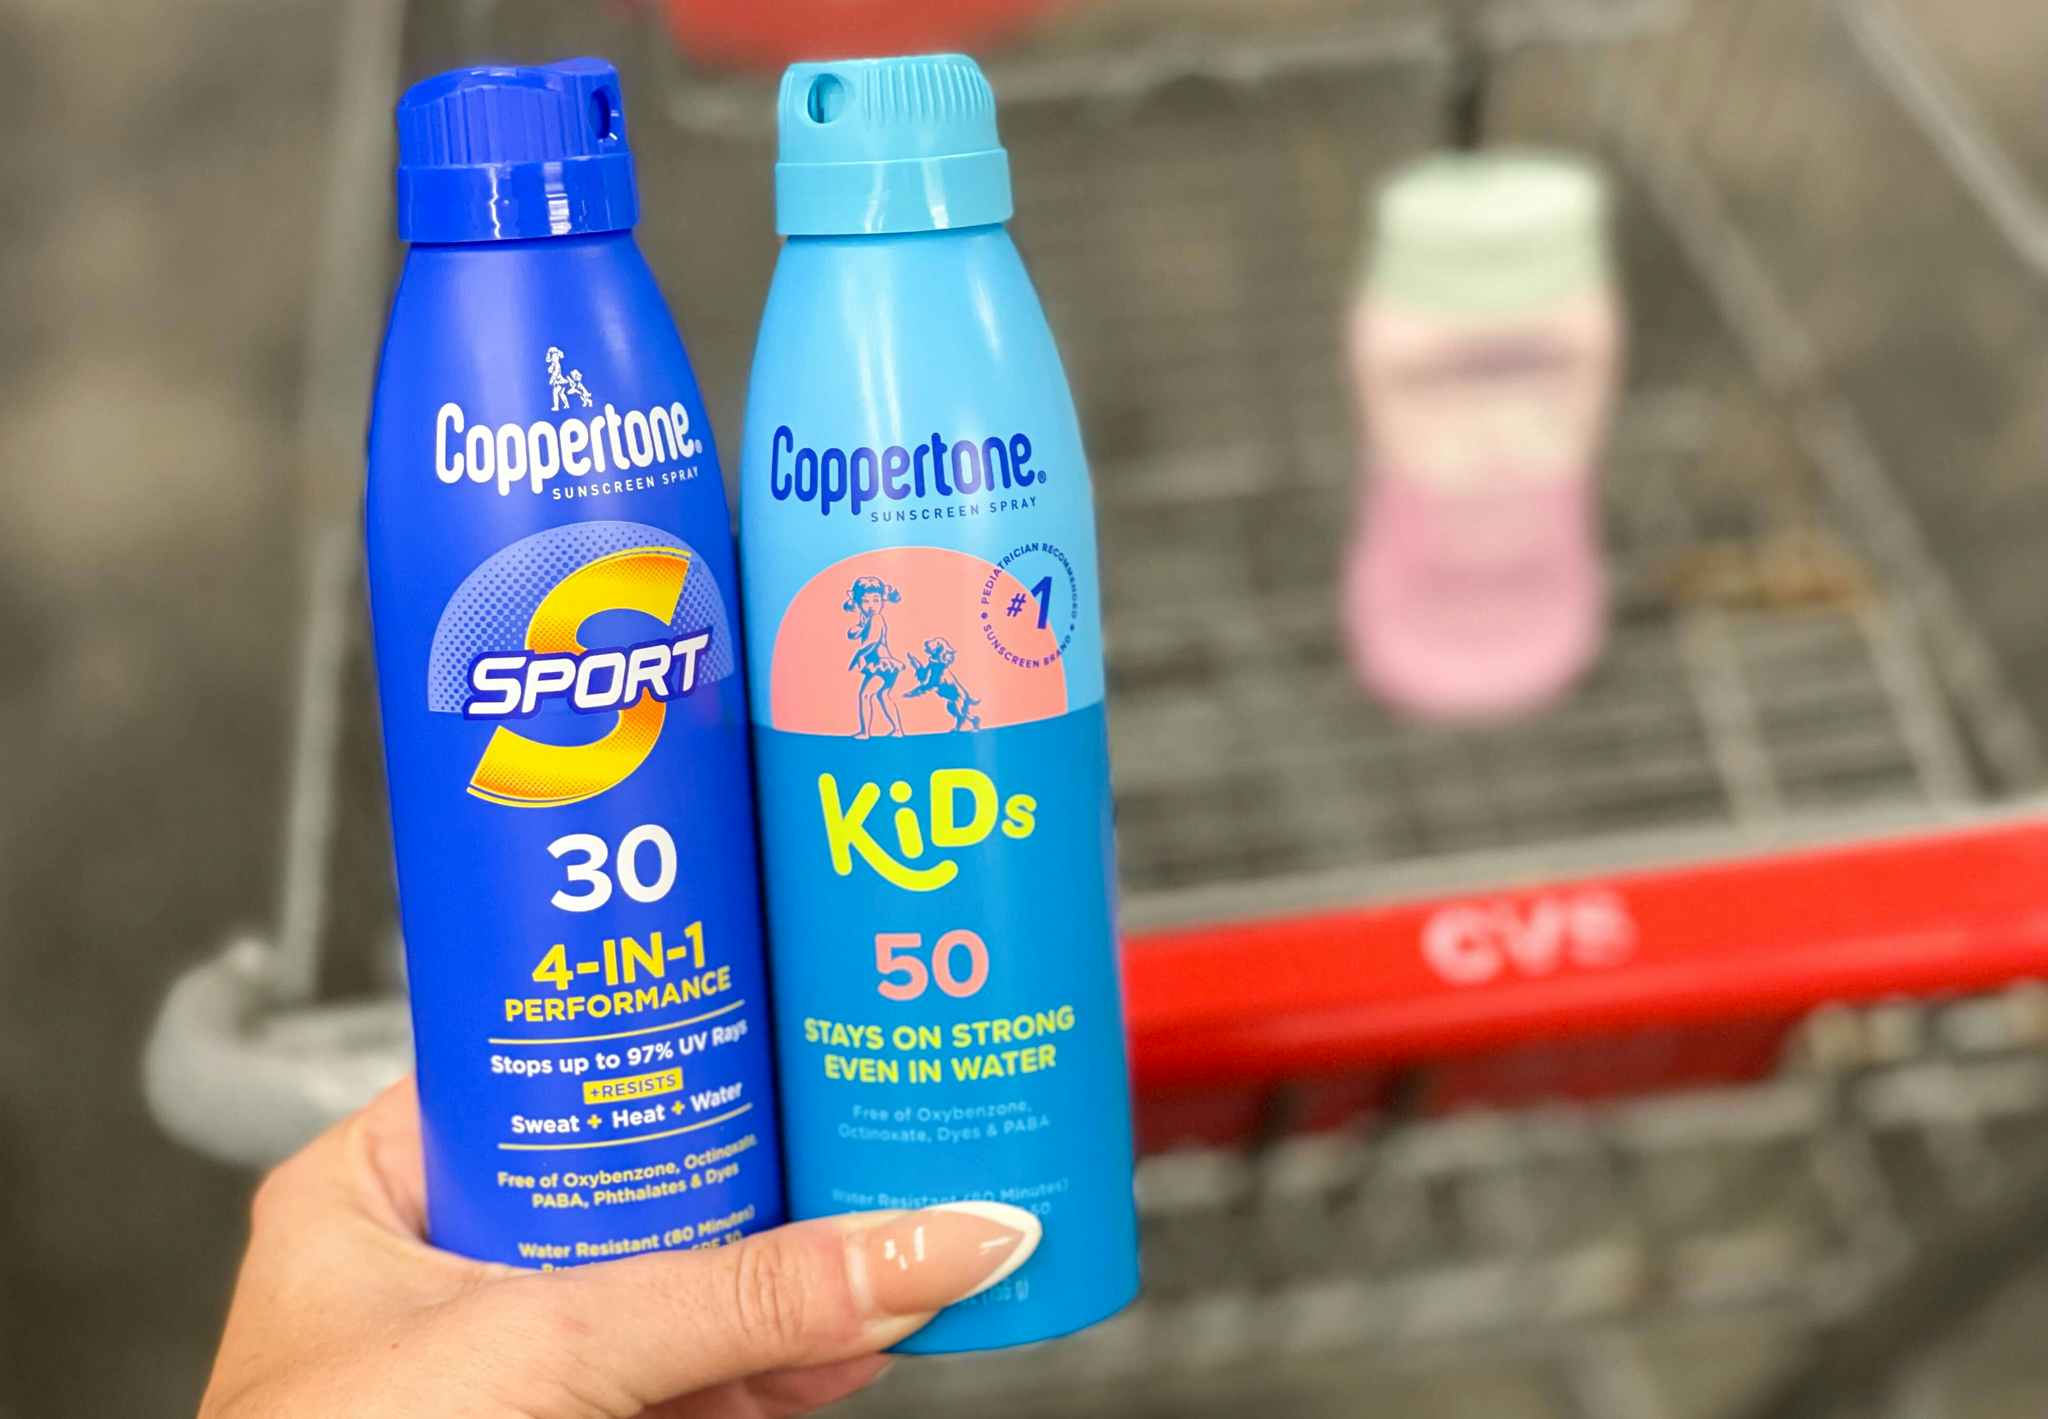 coppertone spray held in hand with coppertone in cart